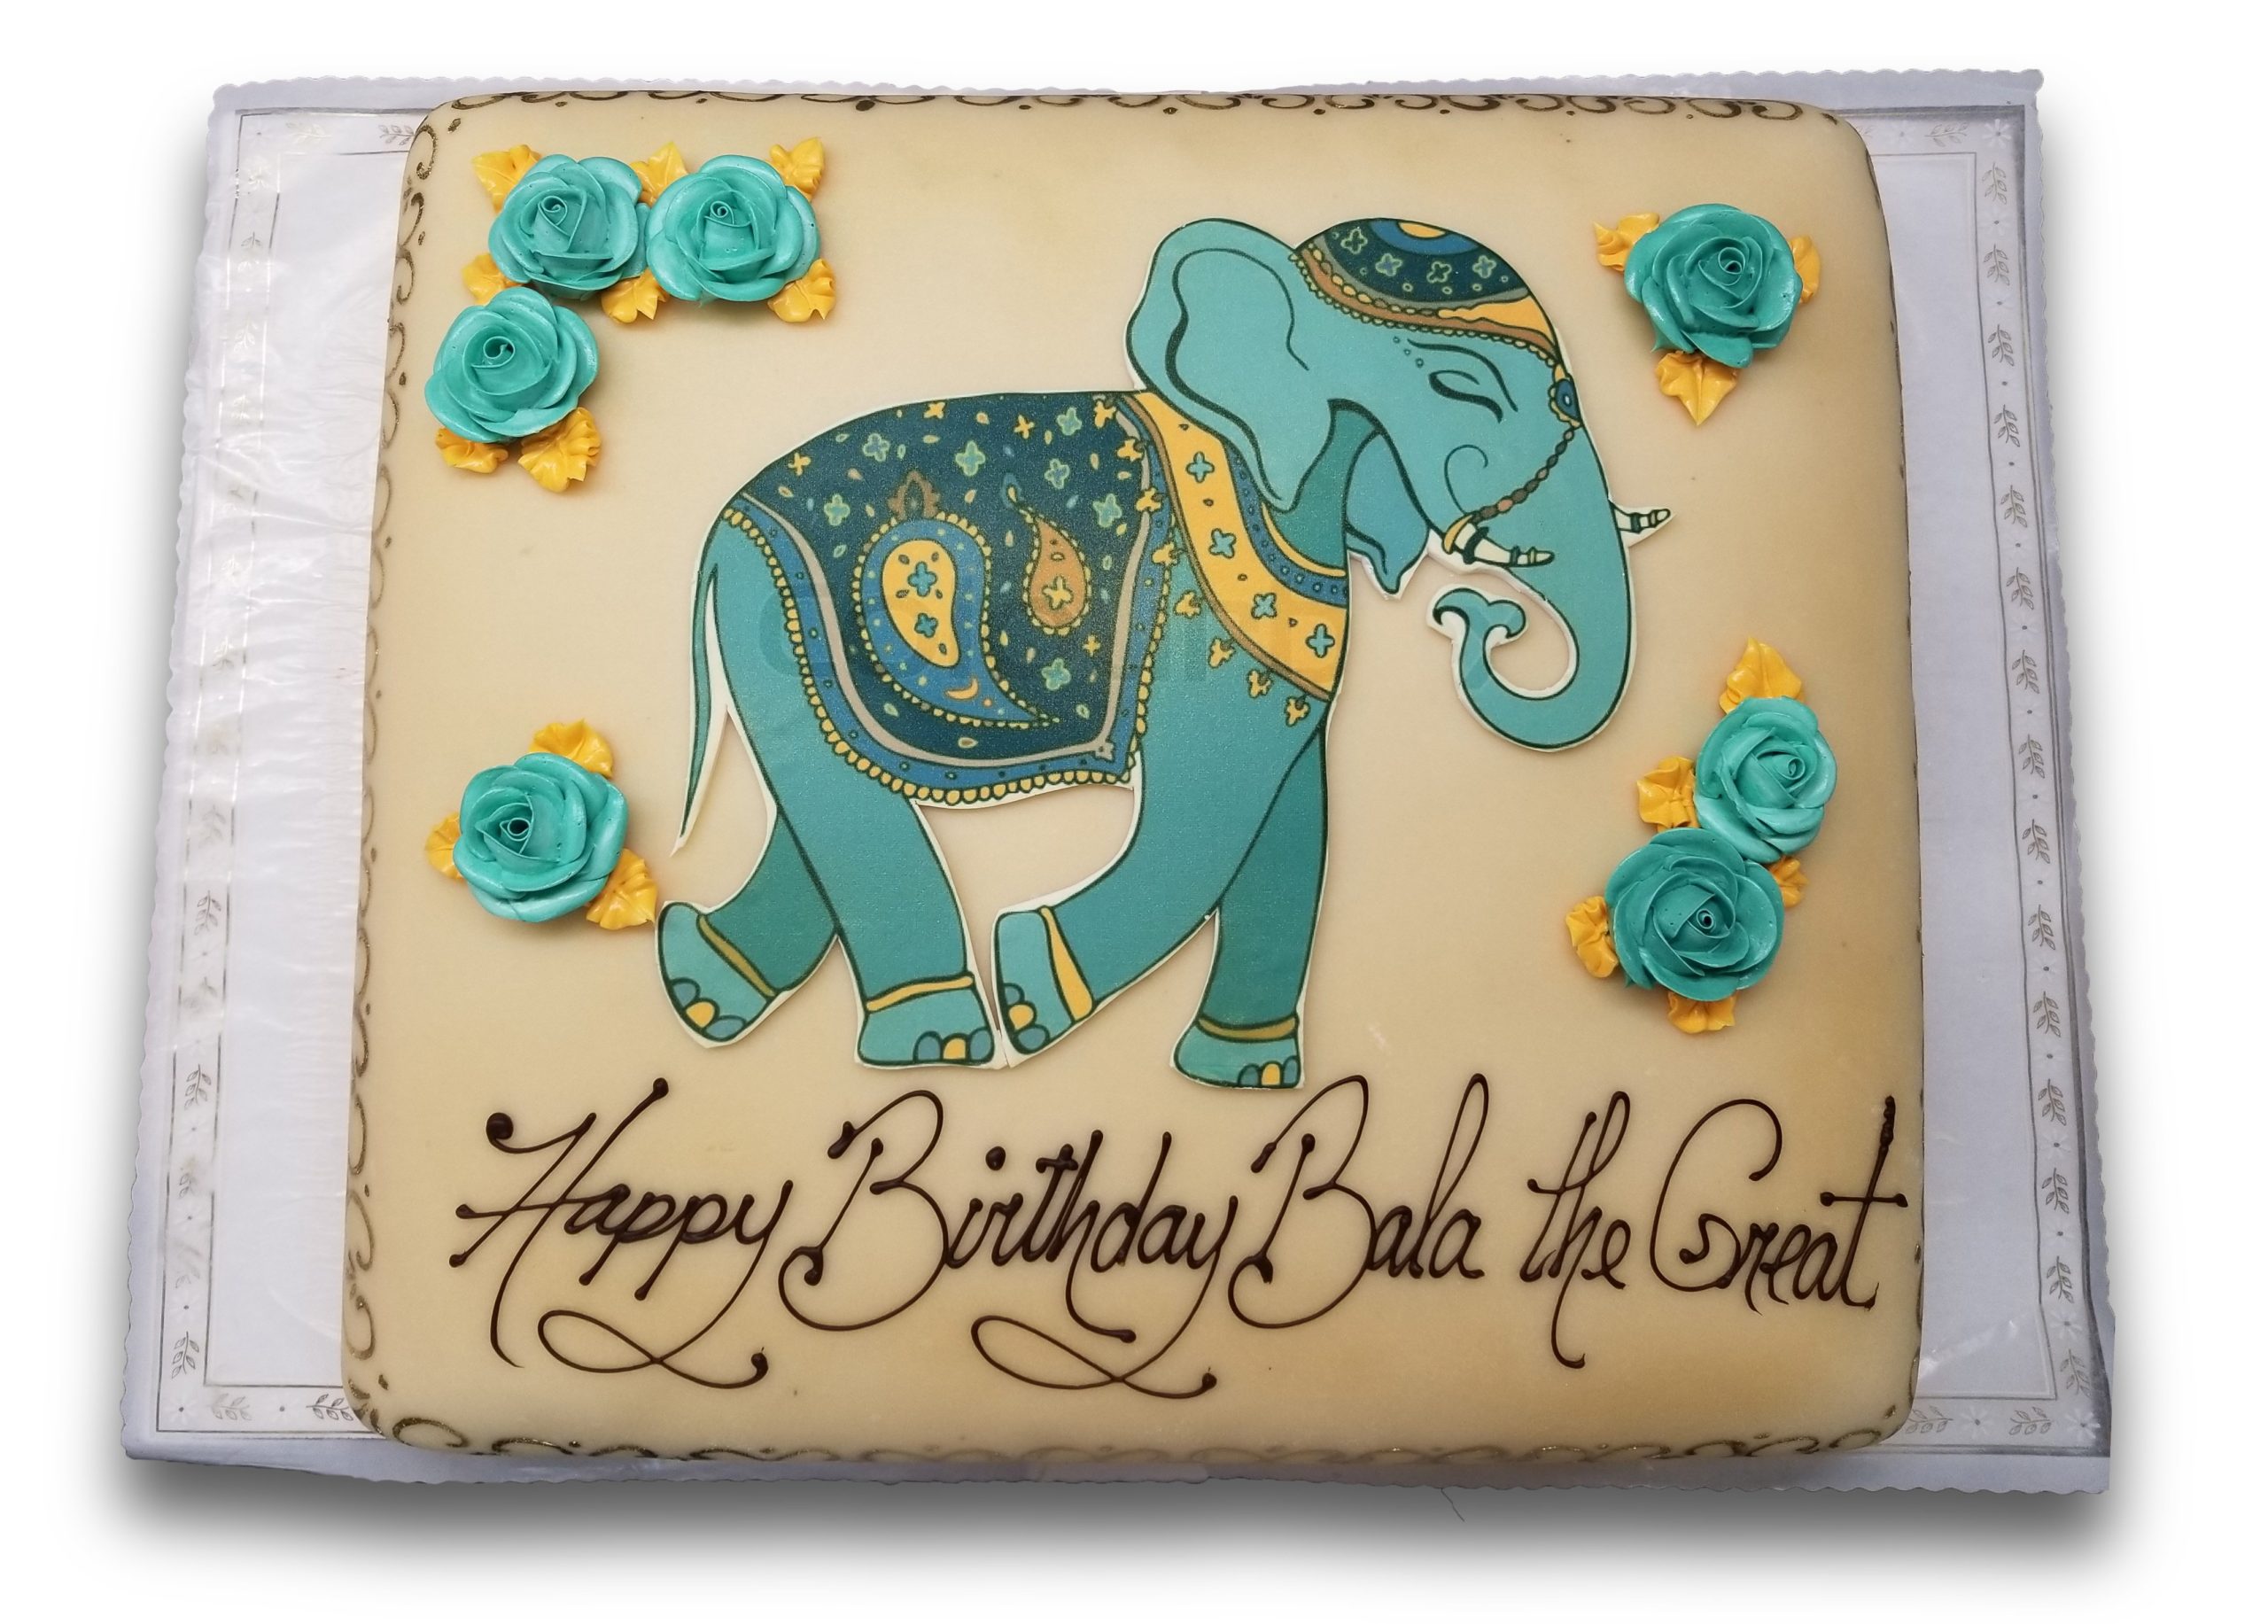 AB025. Teal elephant edible scan image birthday cake with teal and gold roses